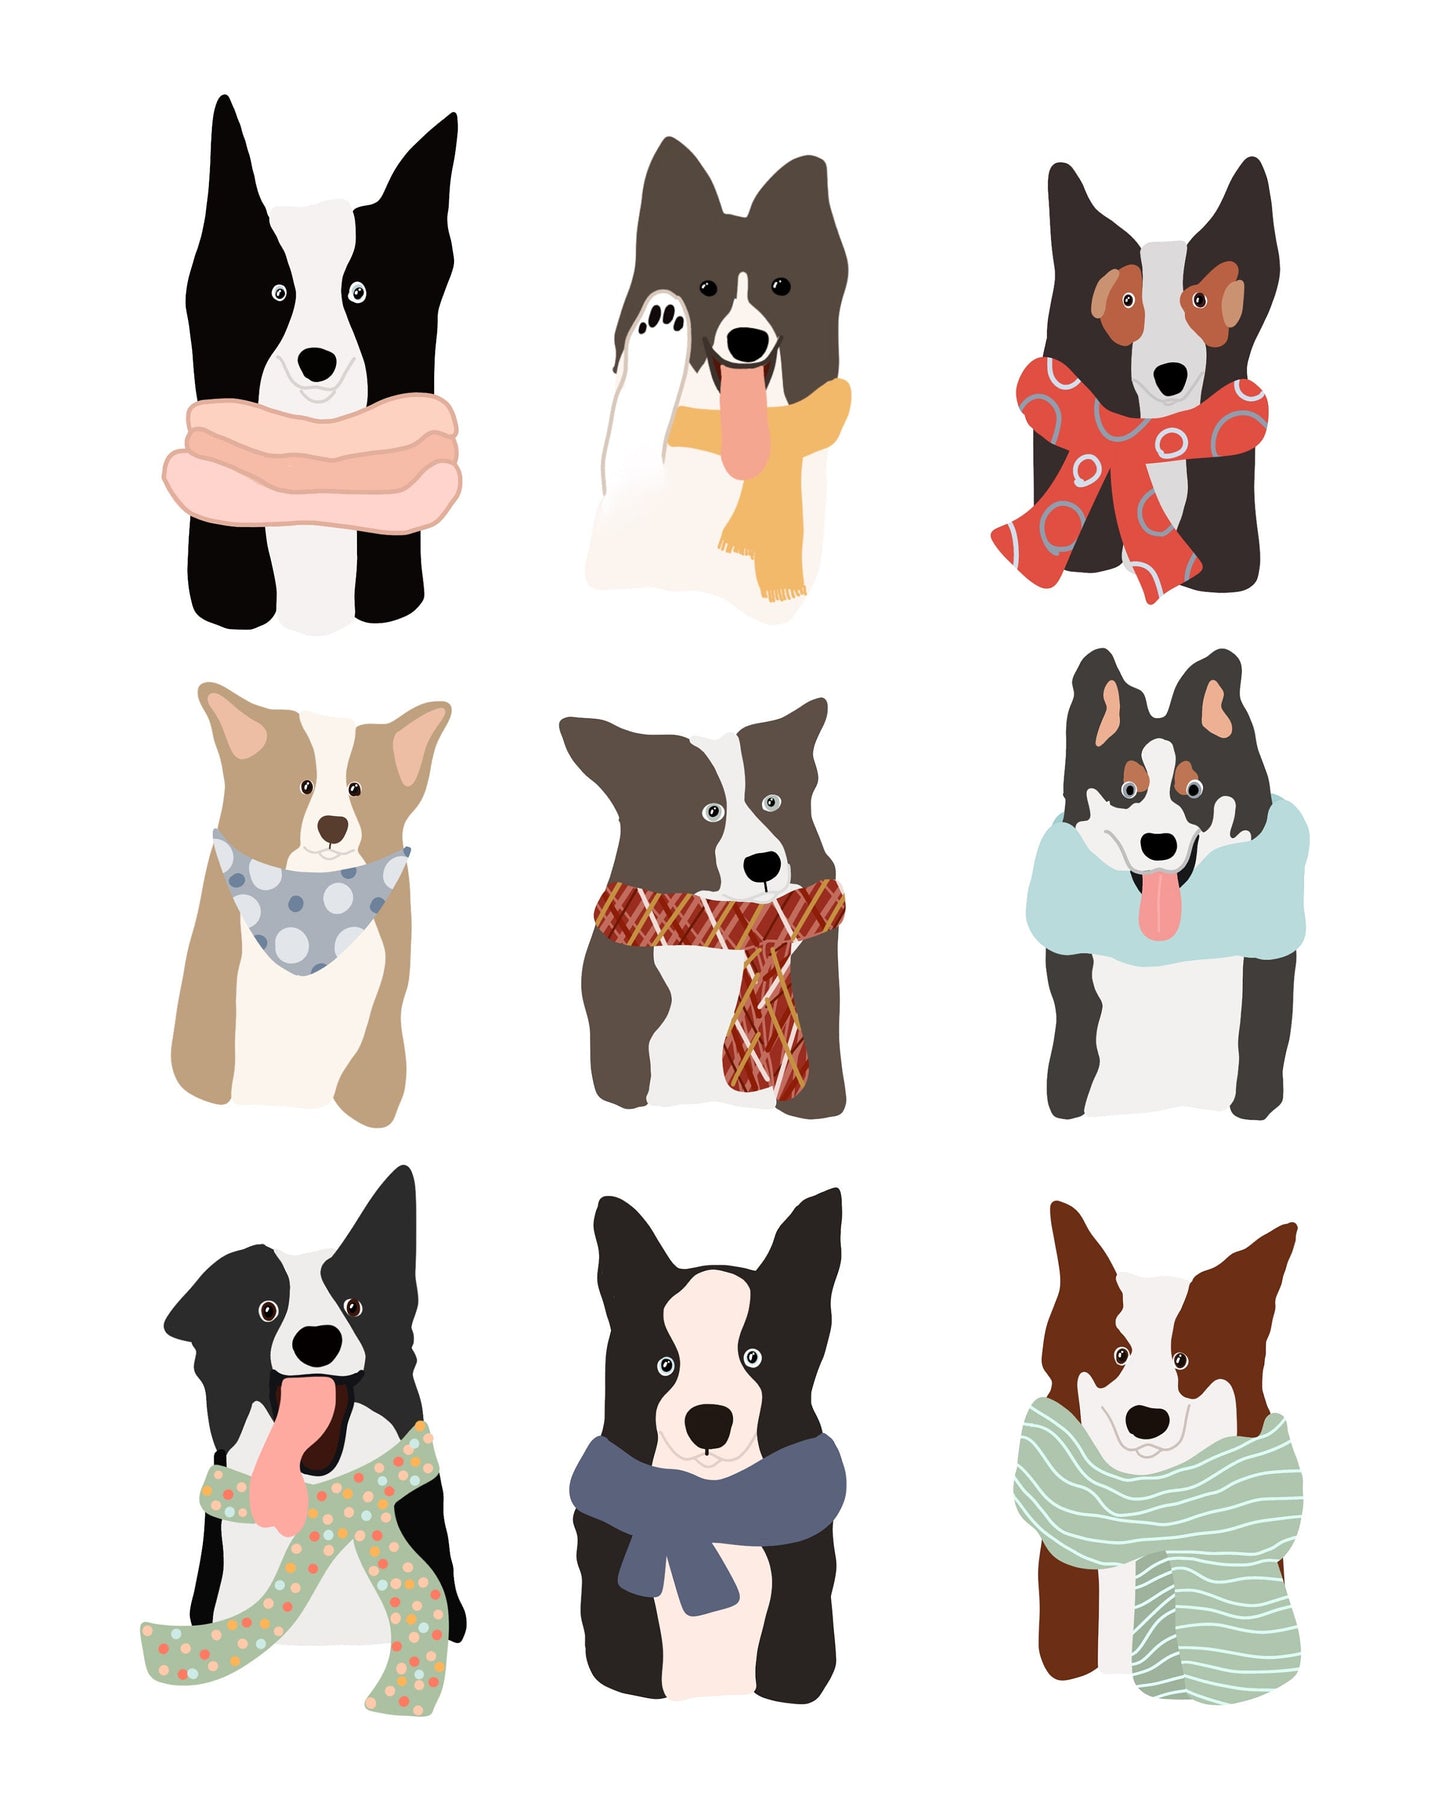 Border Collies with Scarves on Print (UNFRAMED)